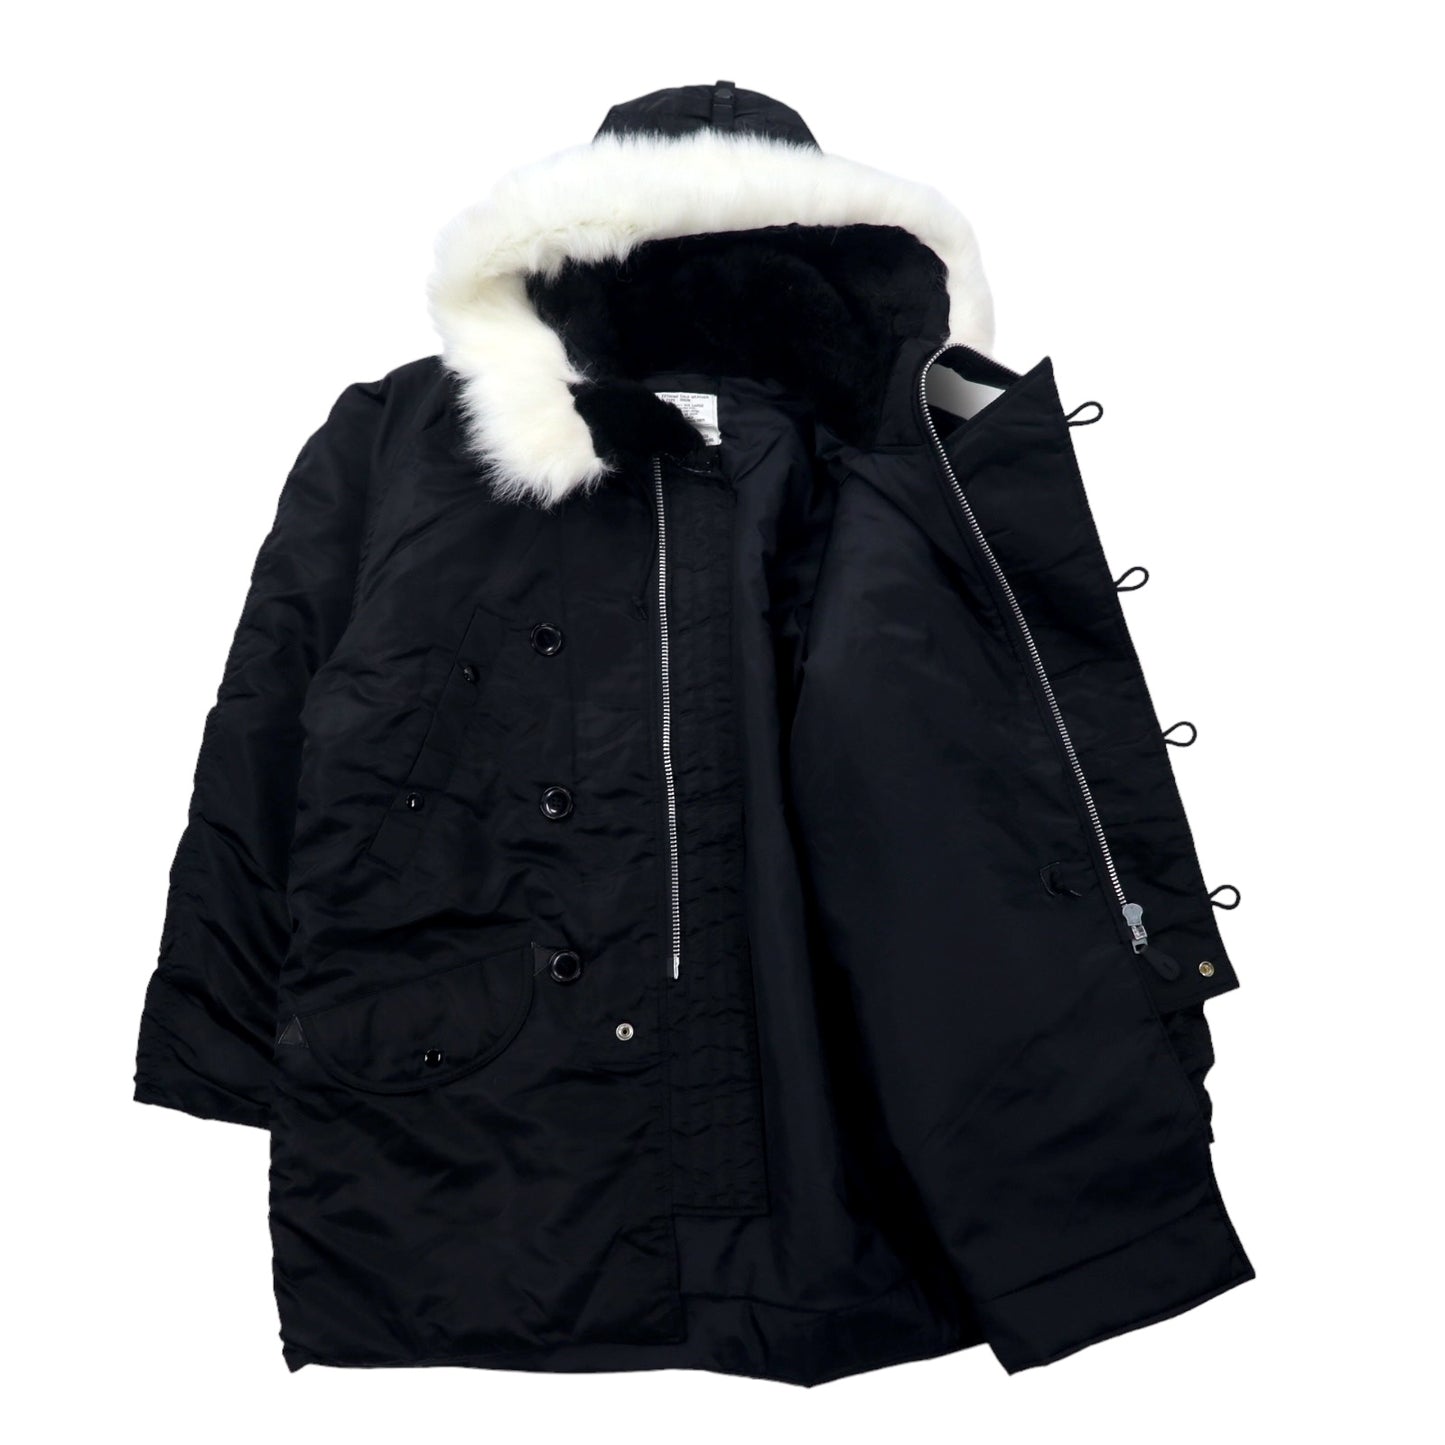 US ARMY N-3B フライトジャケット L ブラック ナイロン ミリタリー PARKA. EXTREME COLD WEATHER 3553-954-2121 Master Jim